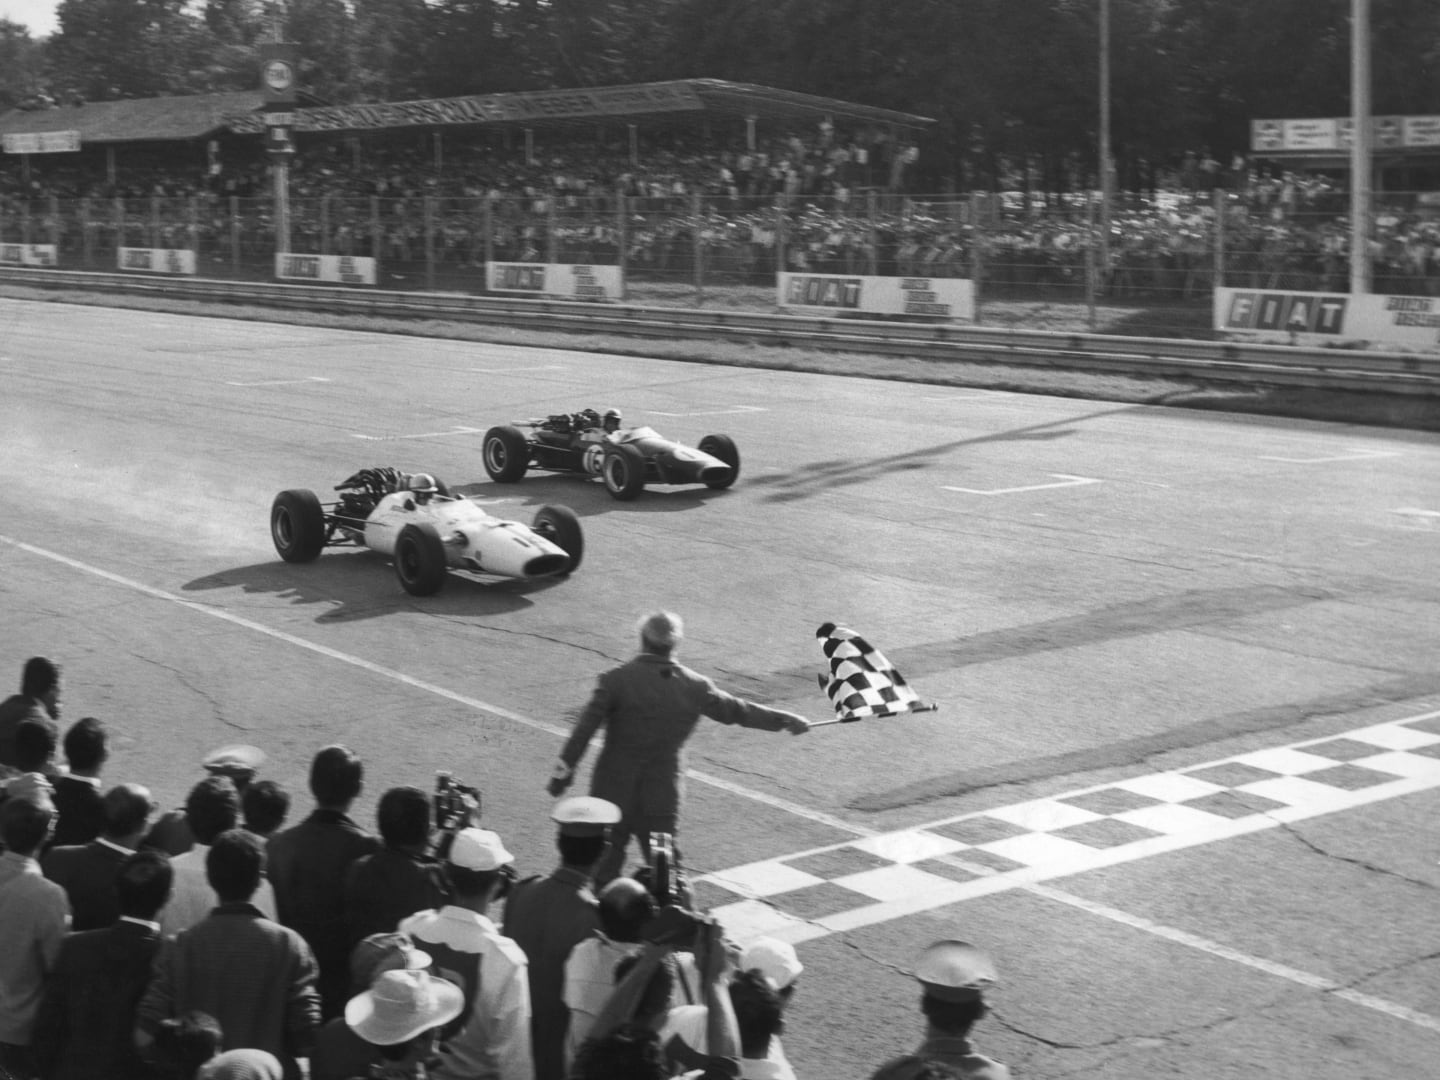 John Surtees narrowly beat Jack Brabham to the chequered flag at Monza in 1967